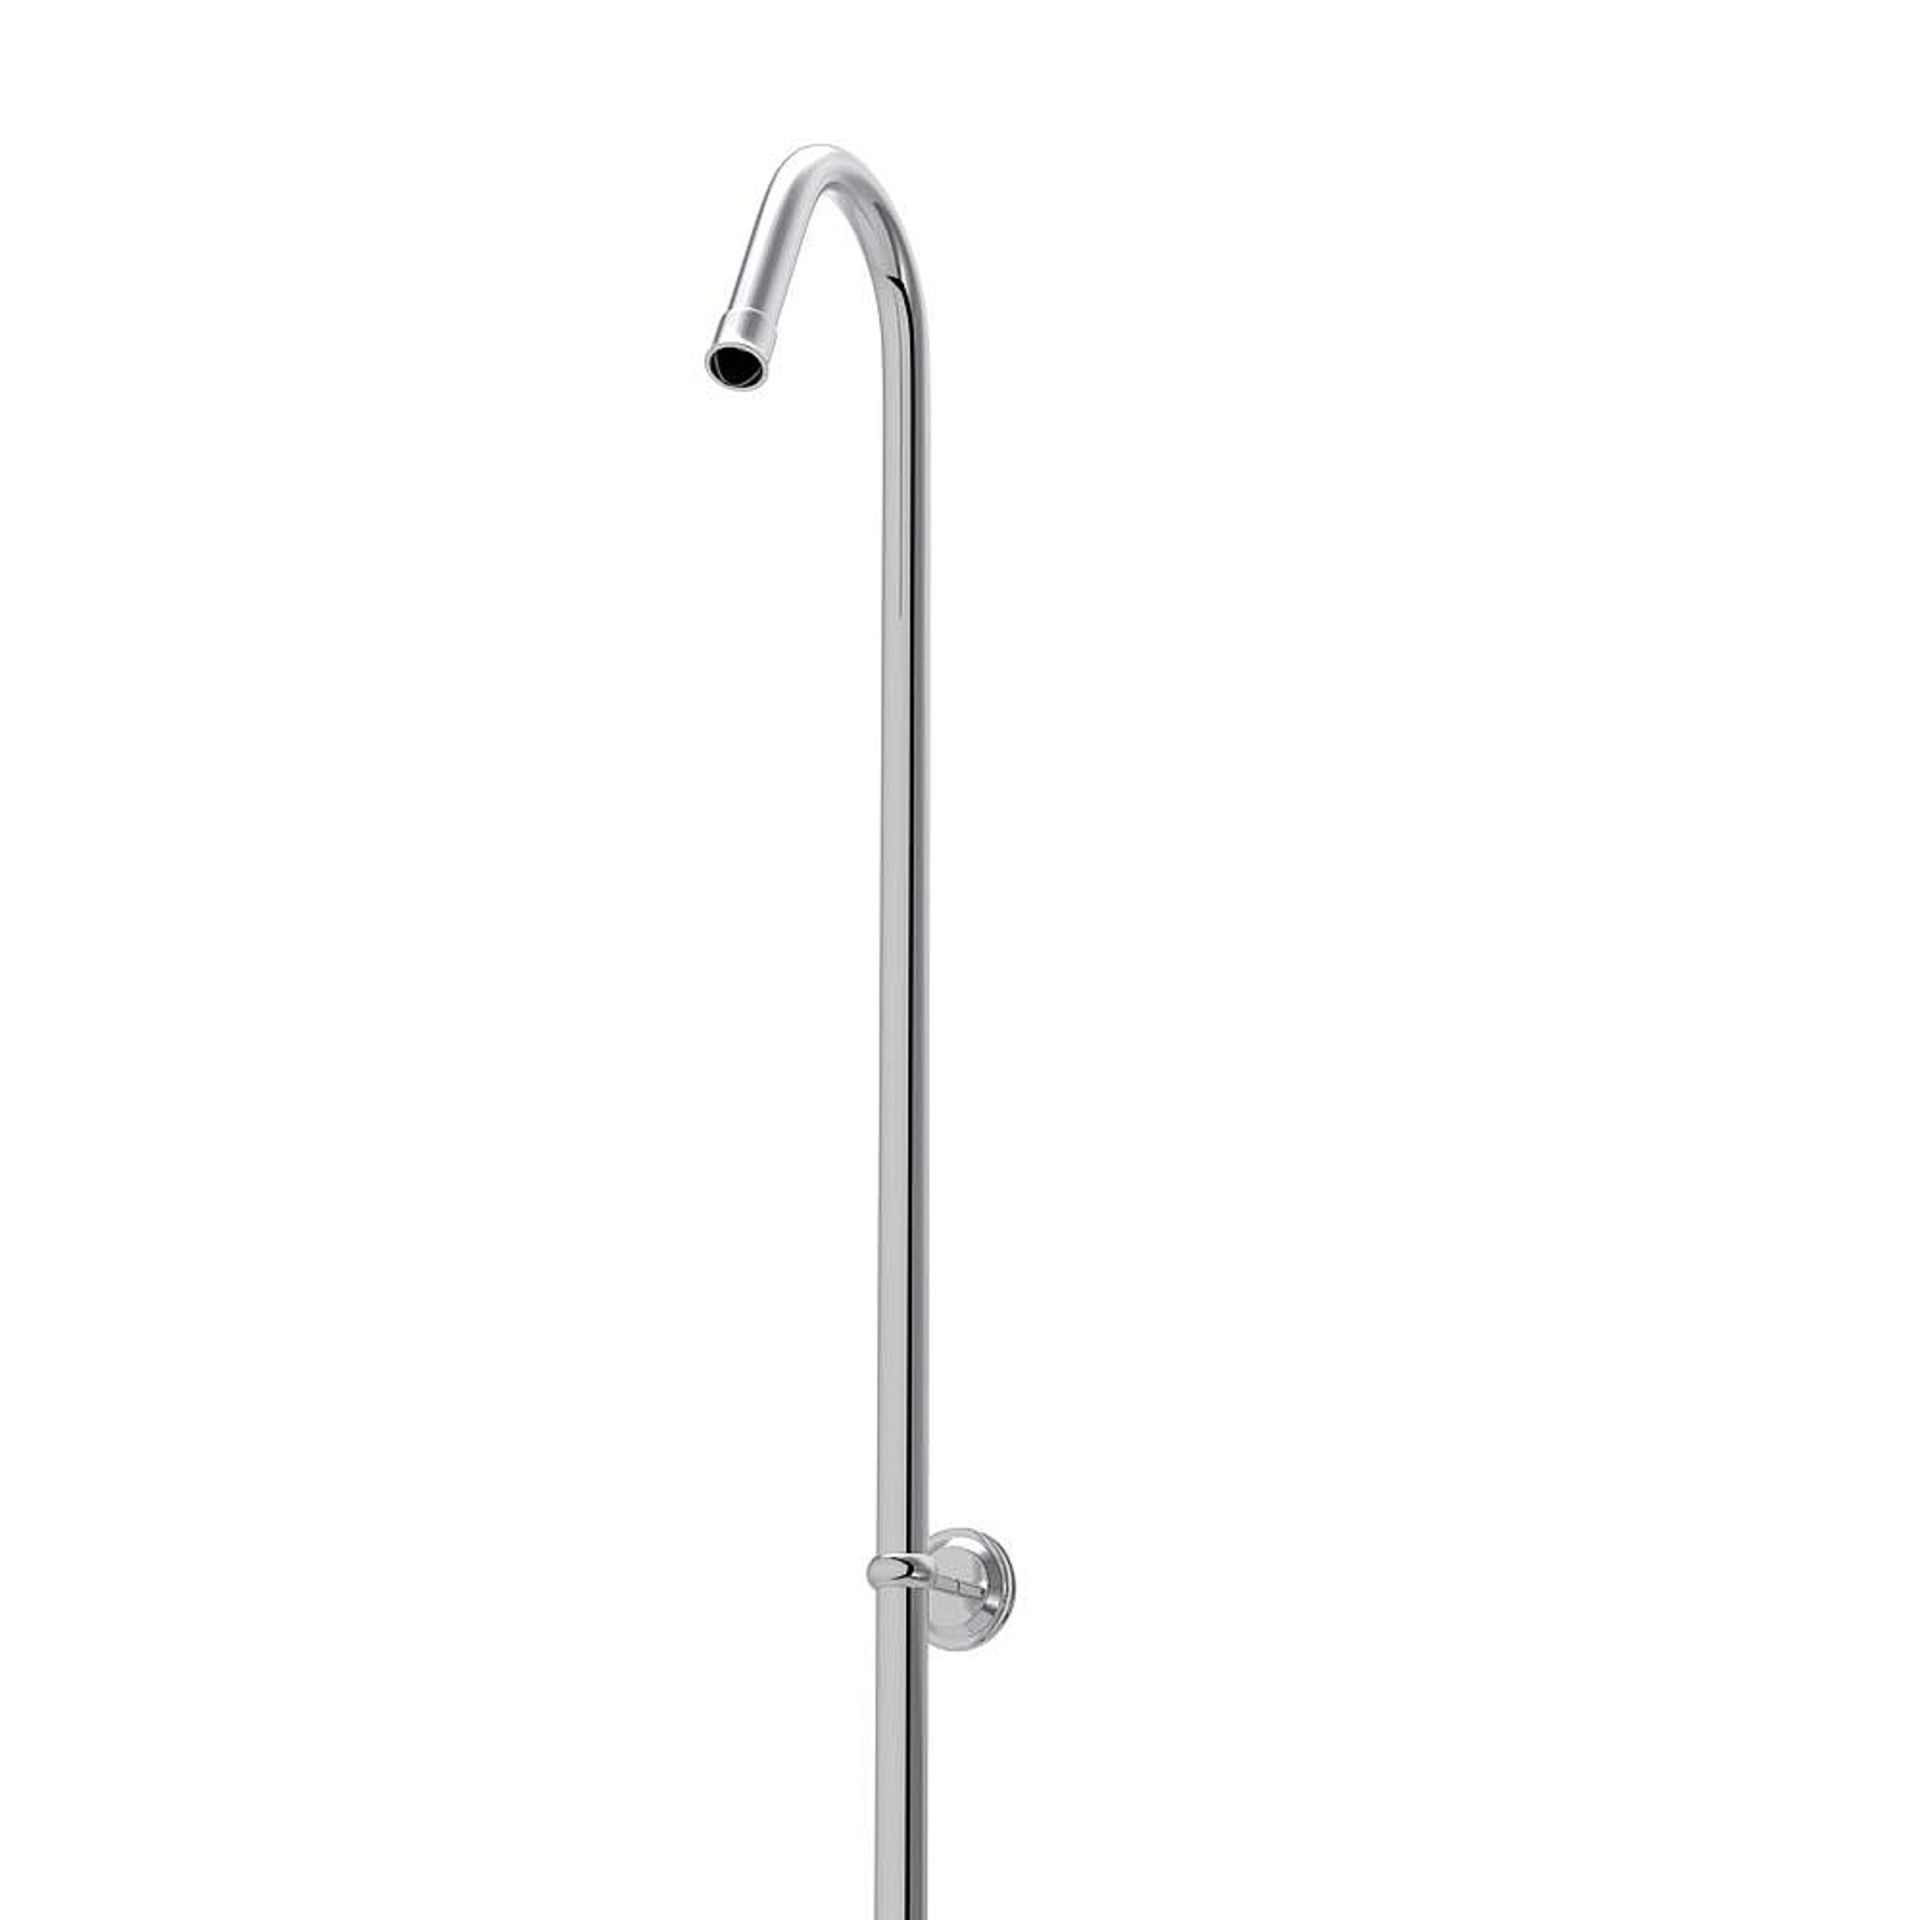 C P Hart ORIGINAL ARC AND WATERLOO SWAN NECK RISER KIT 1600MM AND WALL STAY FOR BATH SHOWER MIXER